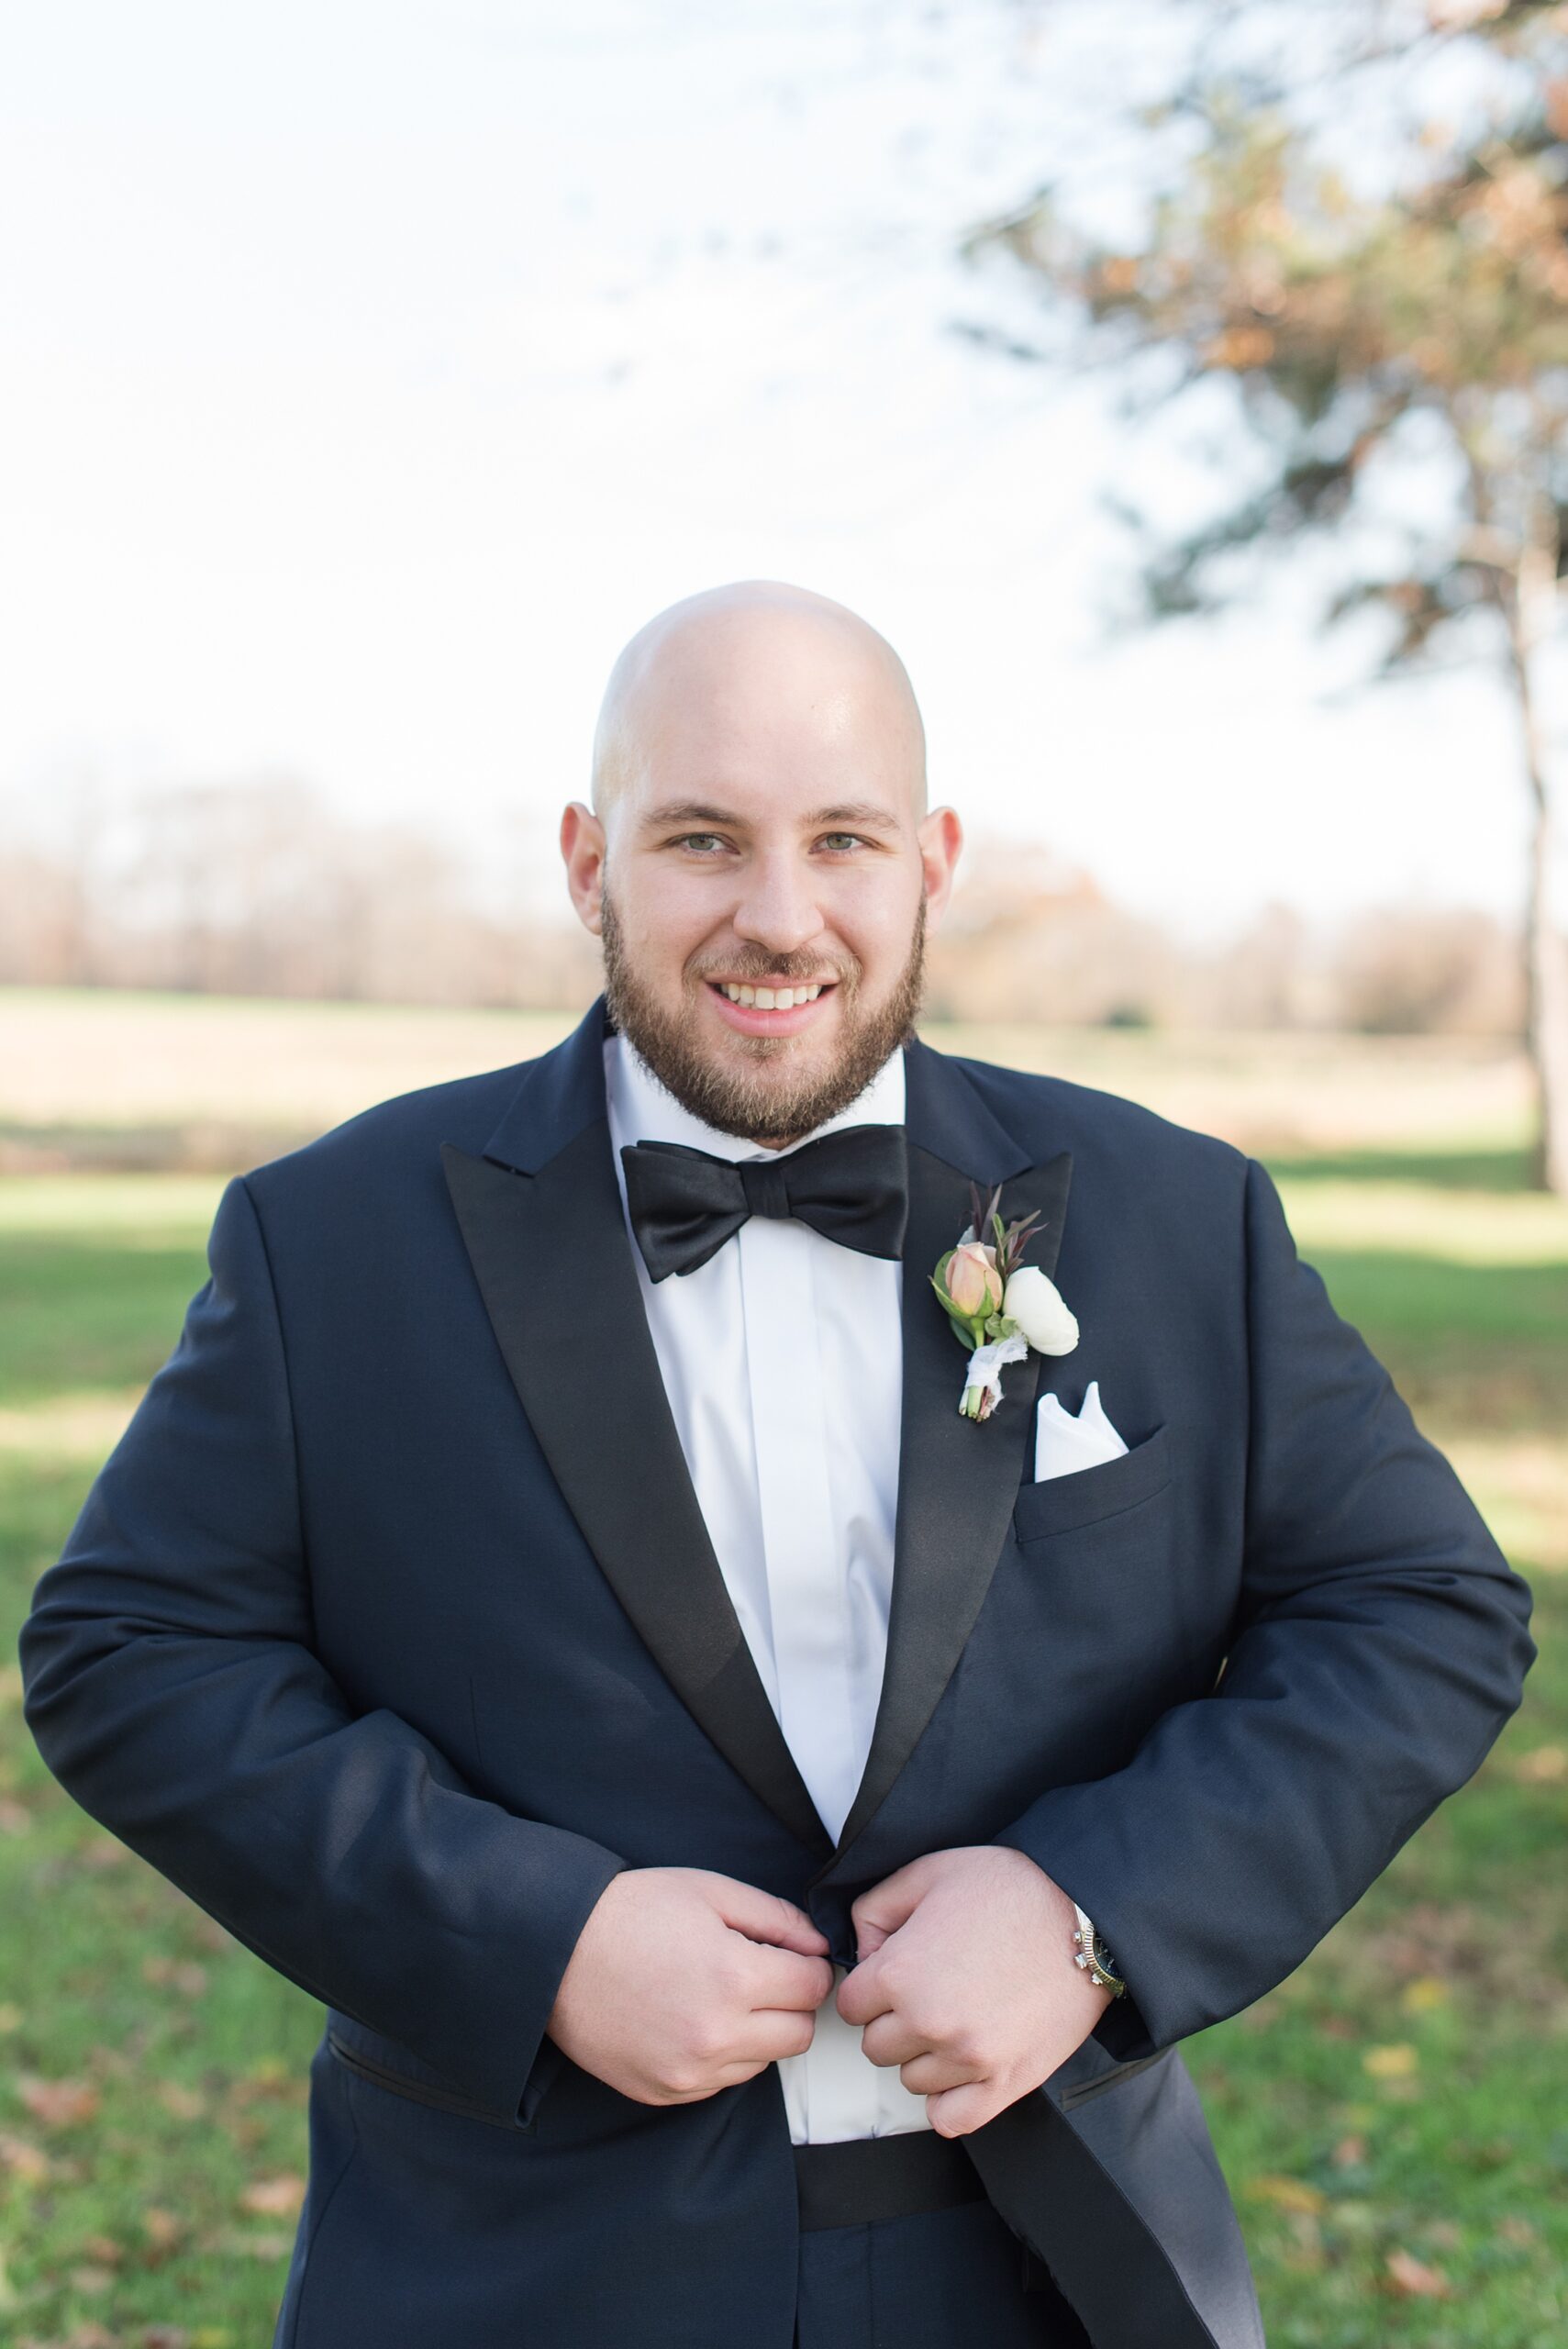 A groom smiles while buttoning his black tuxedo jacket in a grassy field